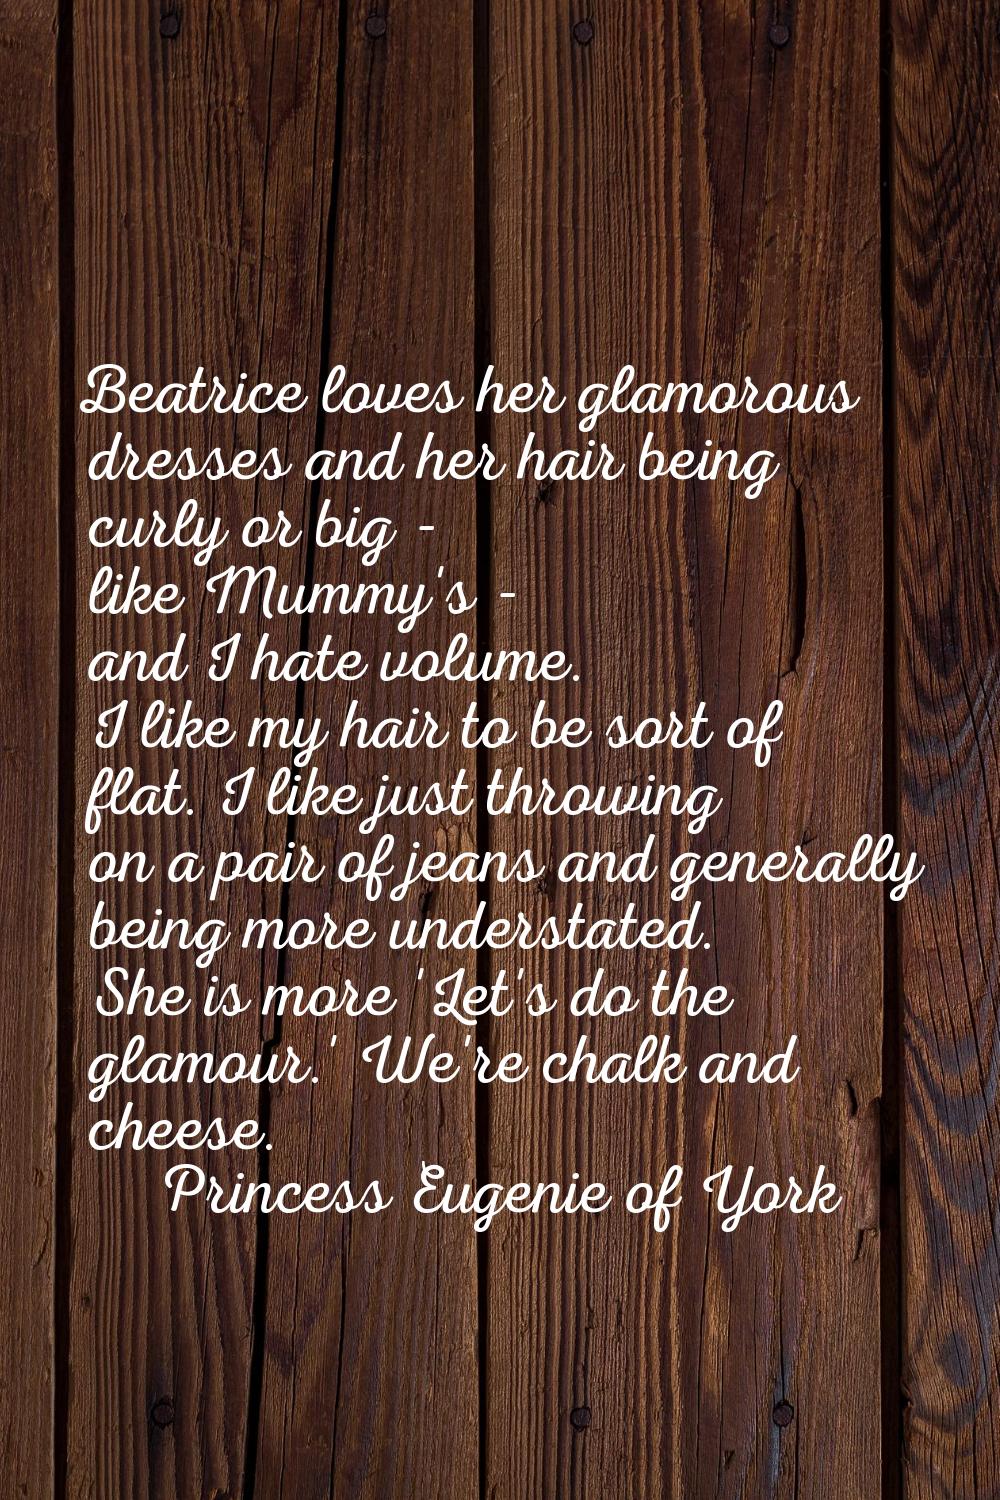 Beatrice loves her glamorous dresses and her hair being curly or big - like Mummy's - and I hate vo